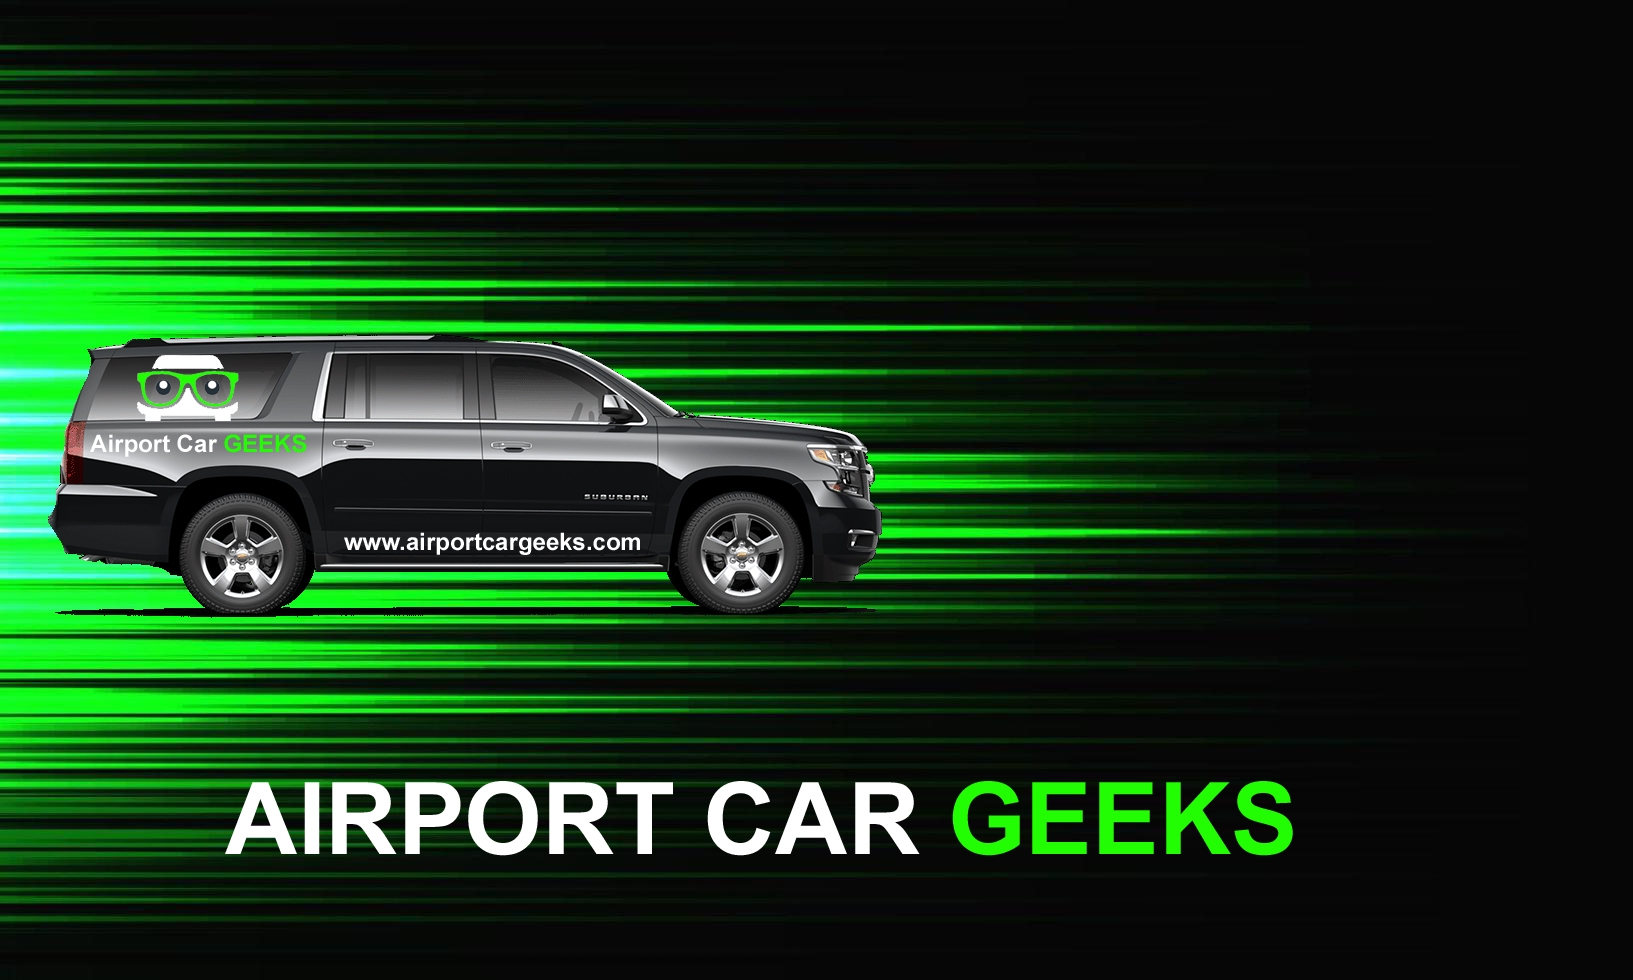 Houston Airport Car Geeks, Black Car Service, Airport Limo, The Woodlands, Spring, Tomball, Kingwood, Cypress, Katy